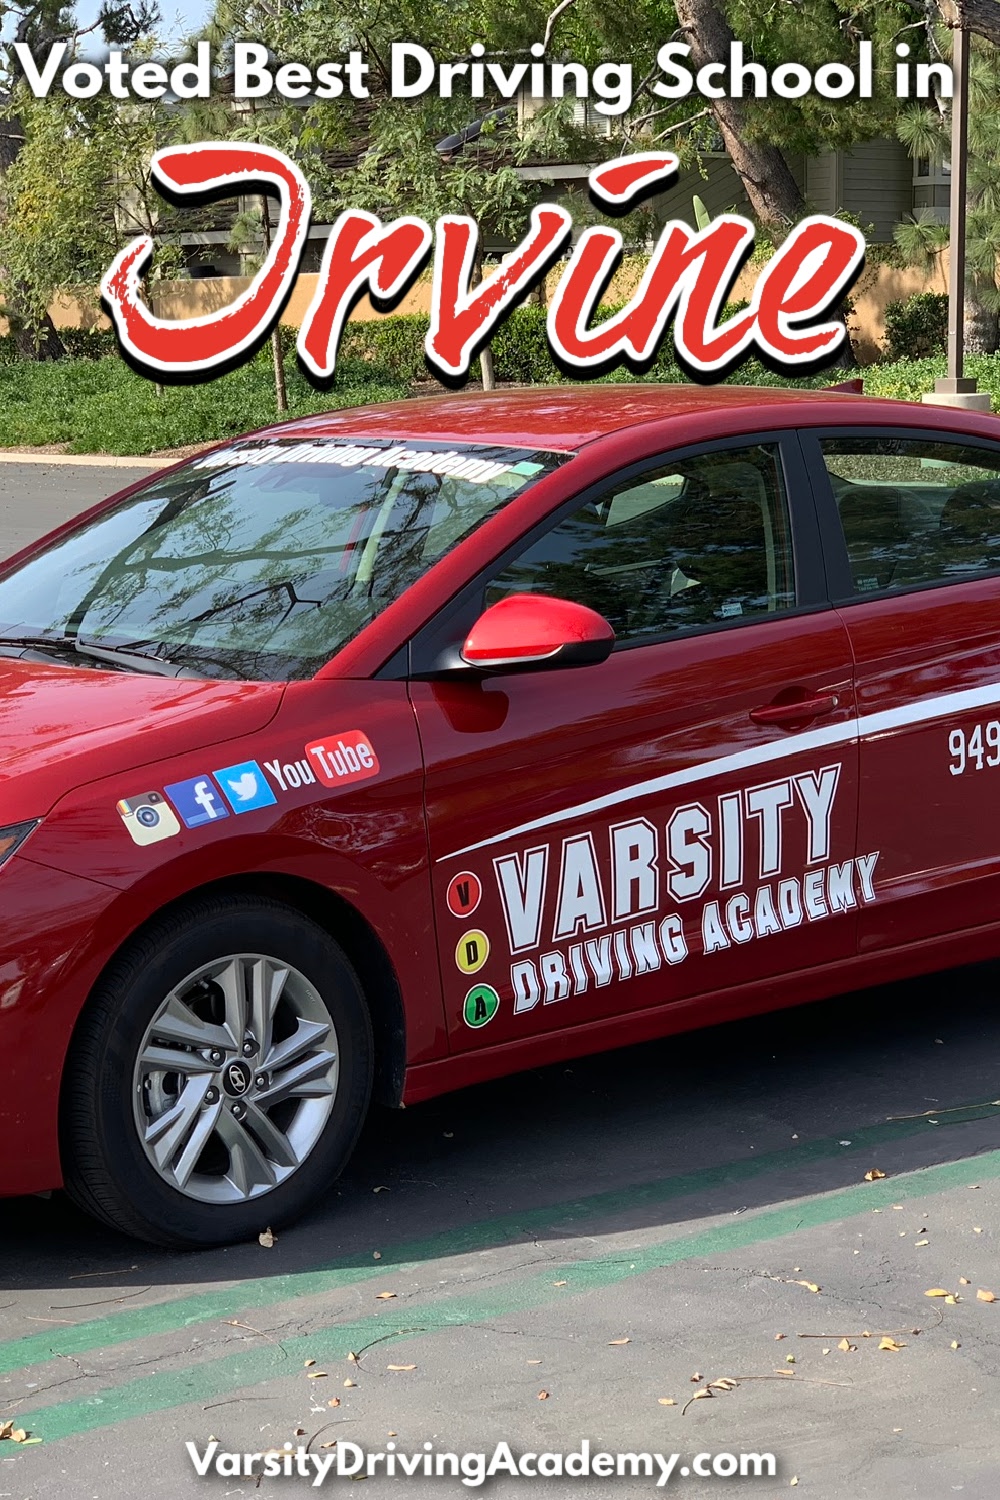 Varsity Driving Academy has been voted best driving school in Irvine again, and it is time we discover the reasons behind the title.